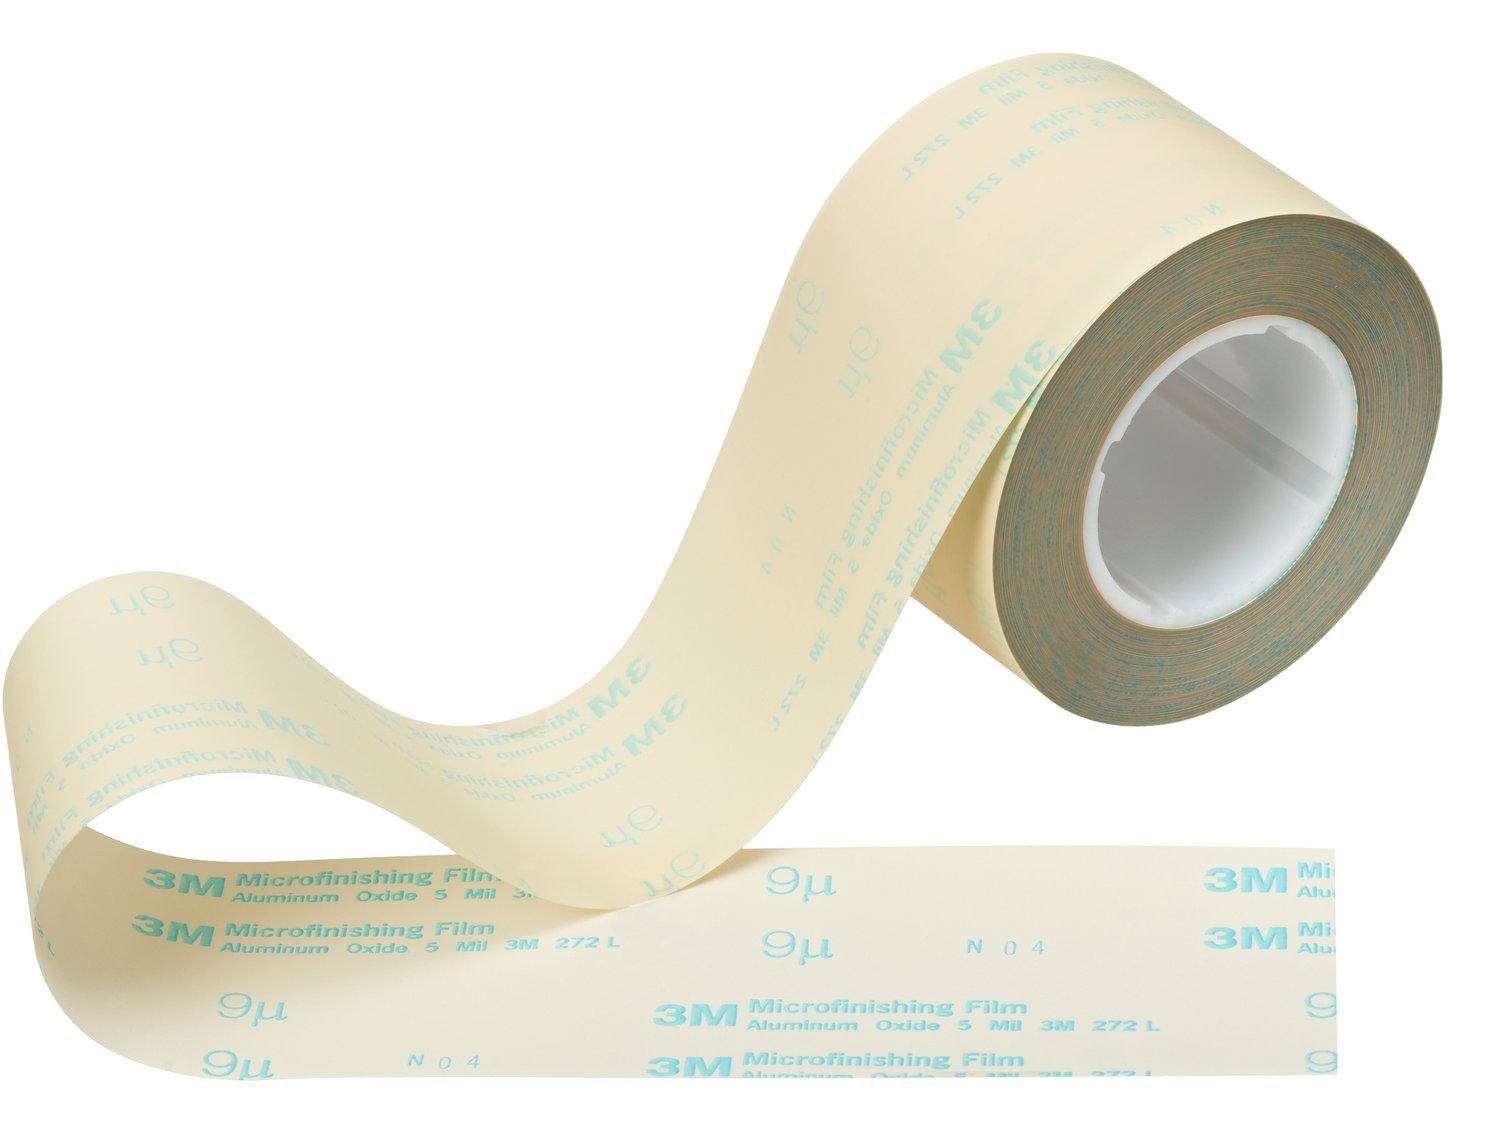 7010533585 - 3M Microfinishing Film Roll 272L, 9 Mic 5MIL, Type UK, 4 in x 150 ft x
3 in (101.6mmx45.75m), Keyed Core, ASO